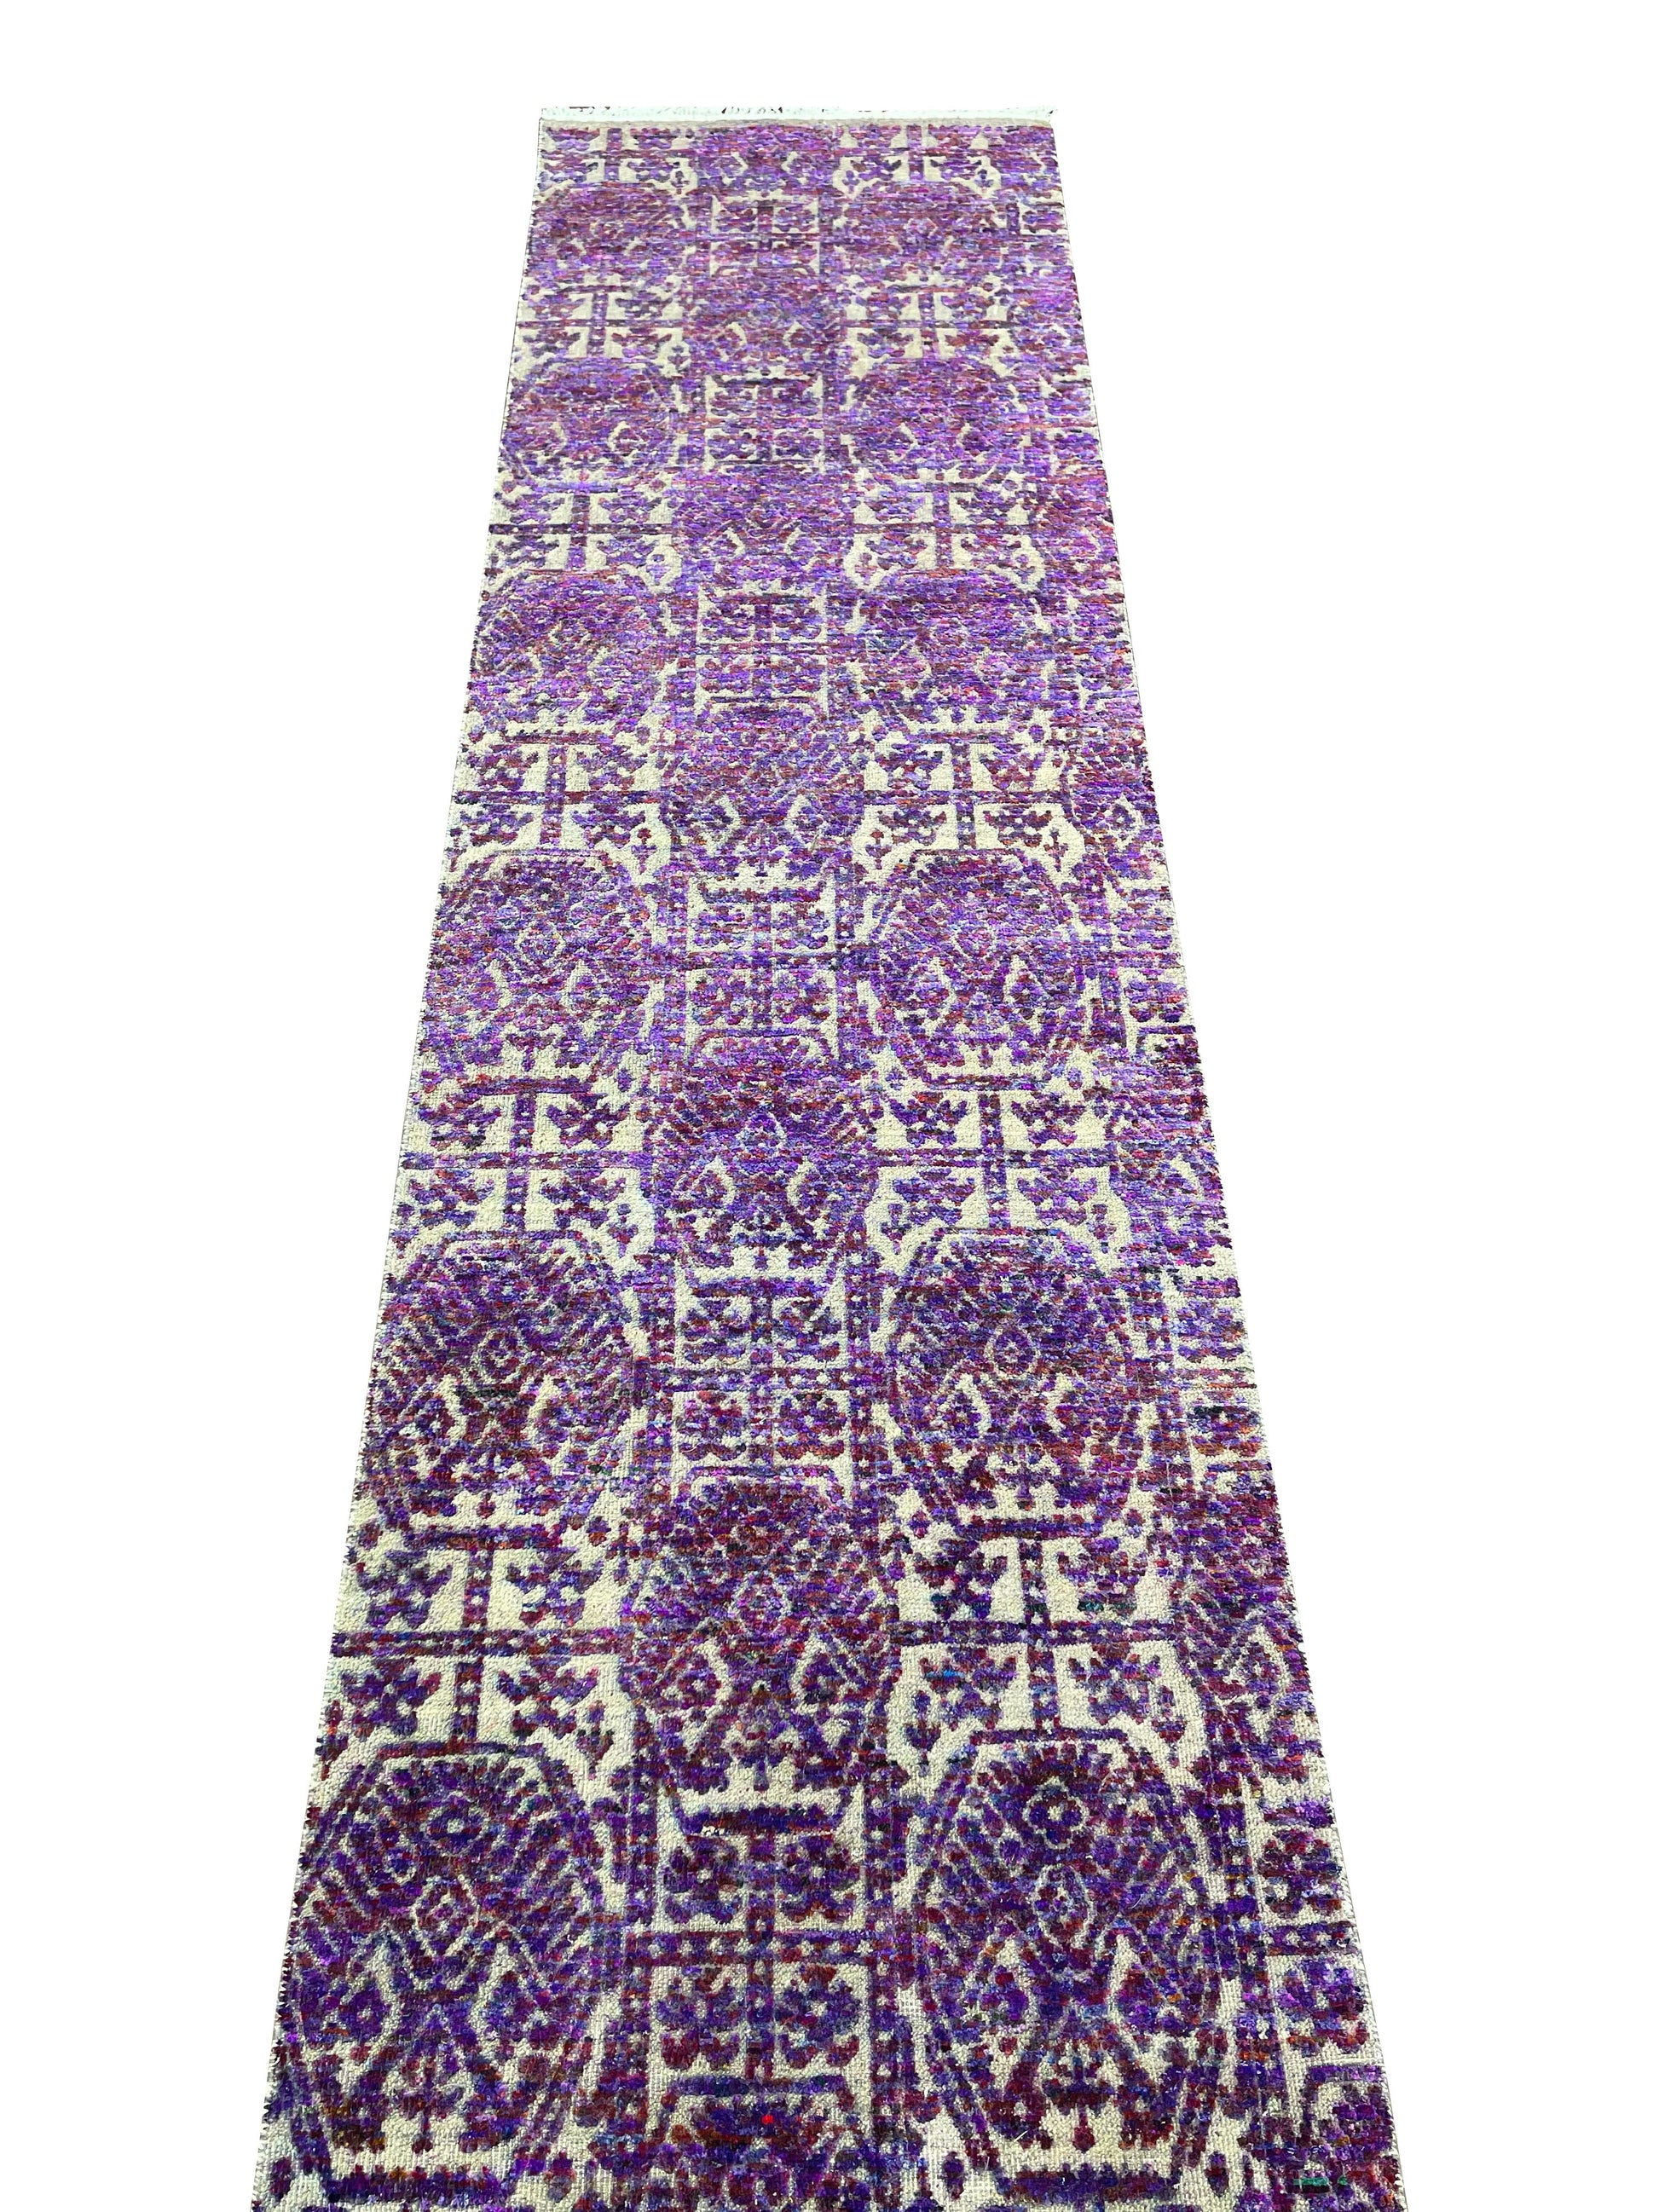 Get trendy with Contemporary Handknotted Runner Rug Purple 2.8X9.11ft 81x302cms - Runner Rugs available at Jaipur Oriental Rugs. Grab yours for $1585.00 today!